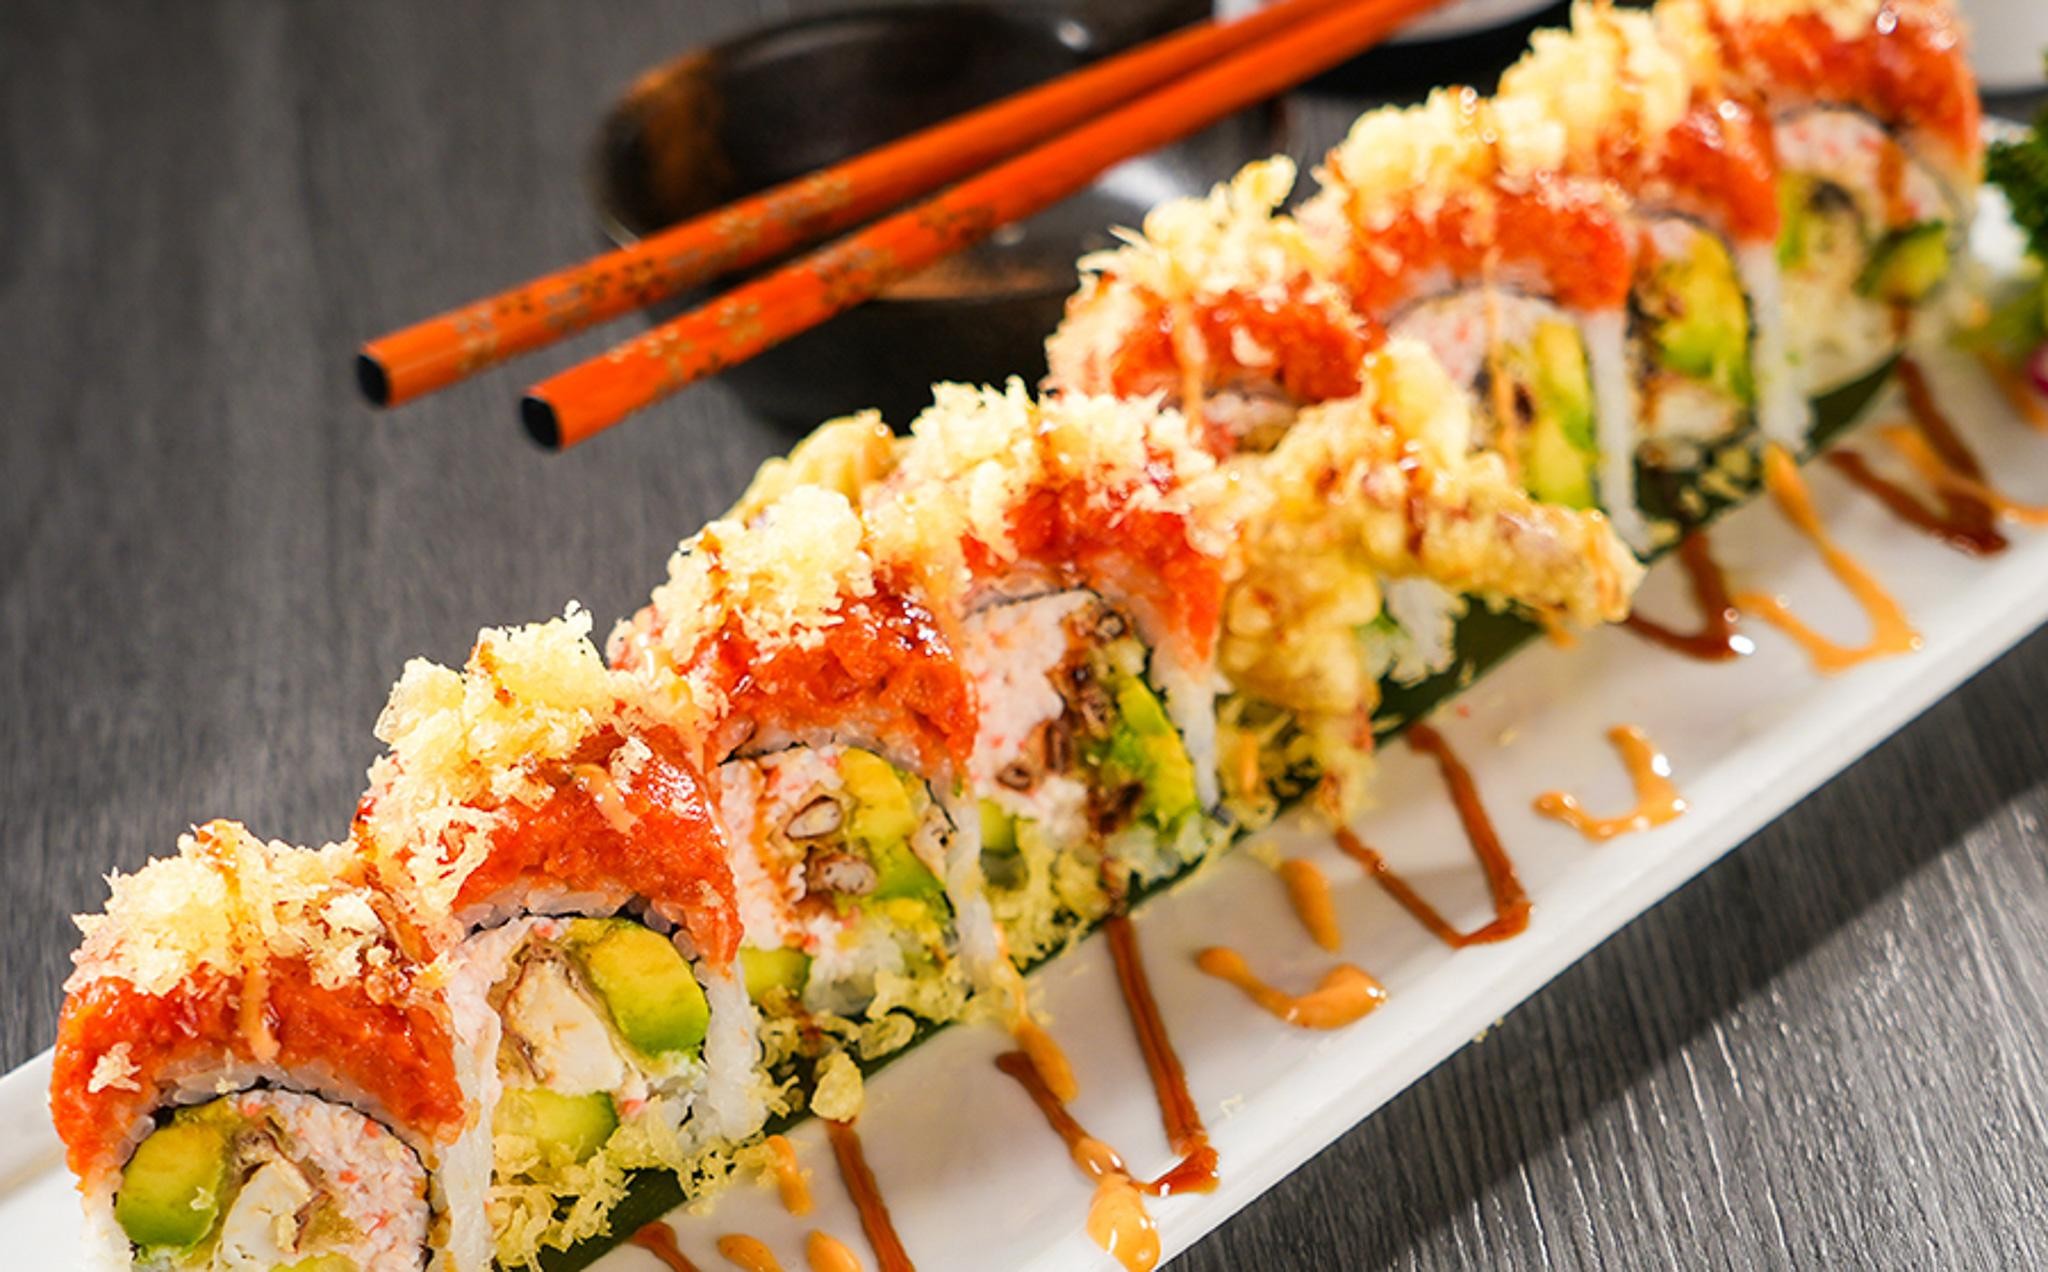 RED SPIDER ROLL